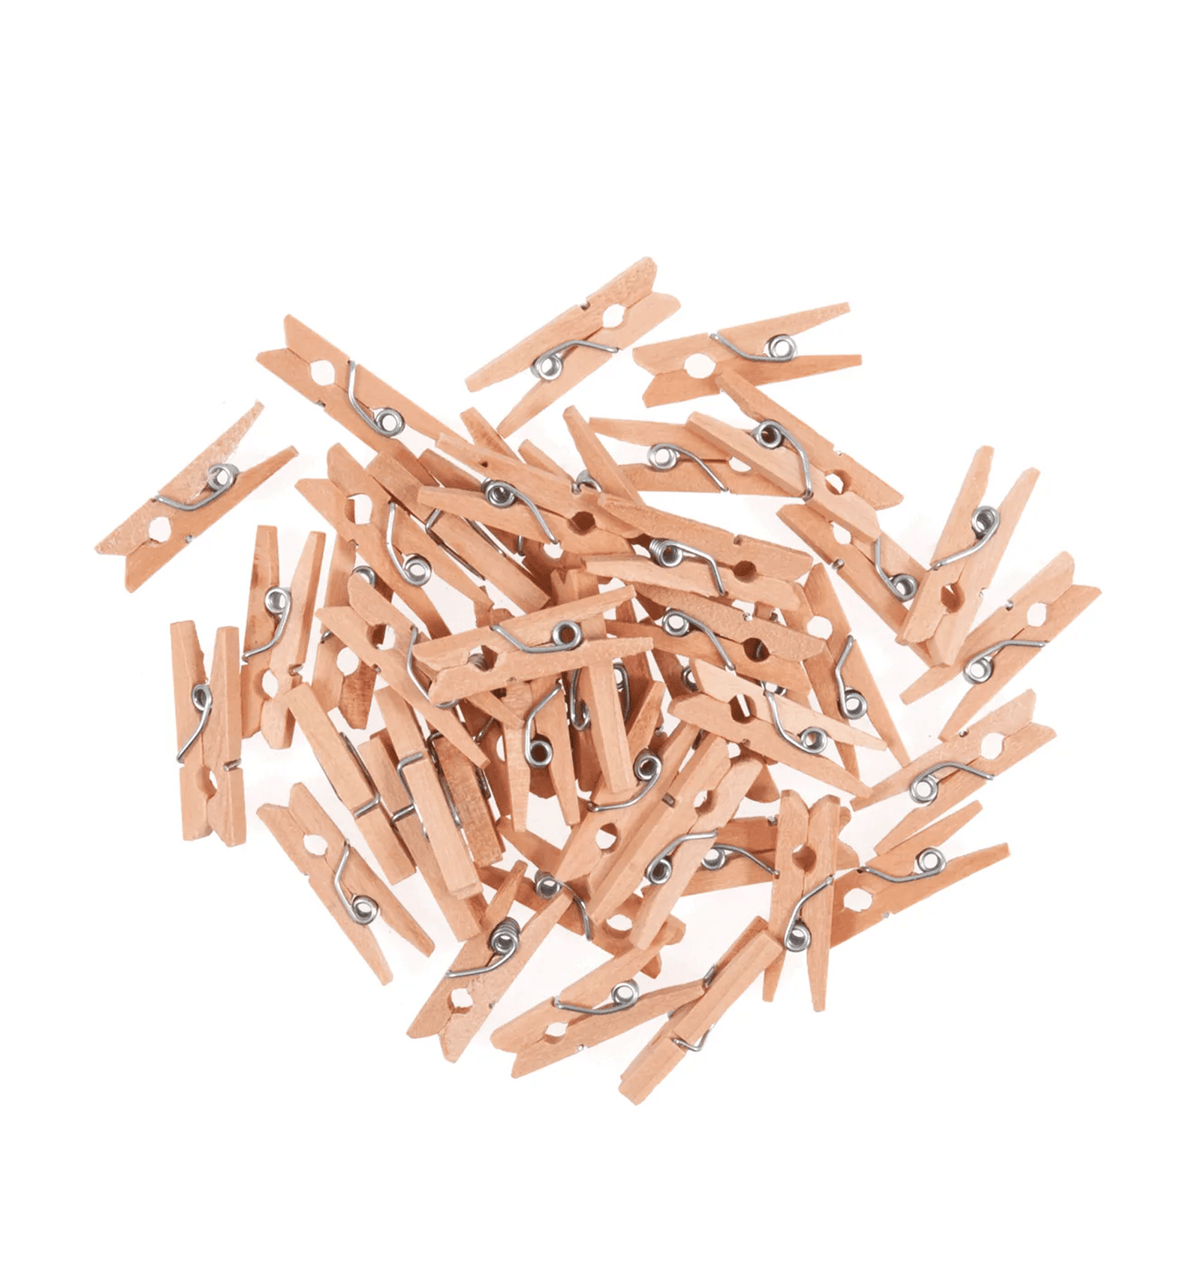 20 x Mini Wooden Clothes Pegs